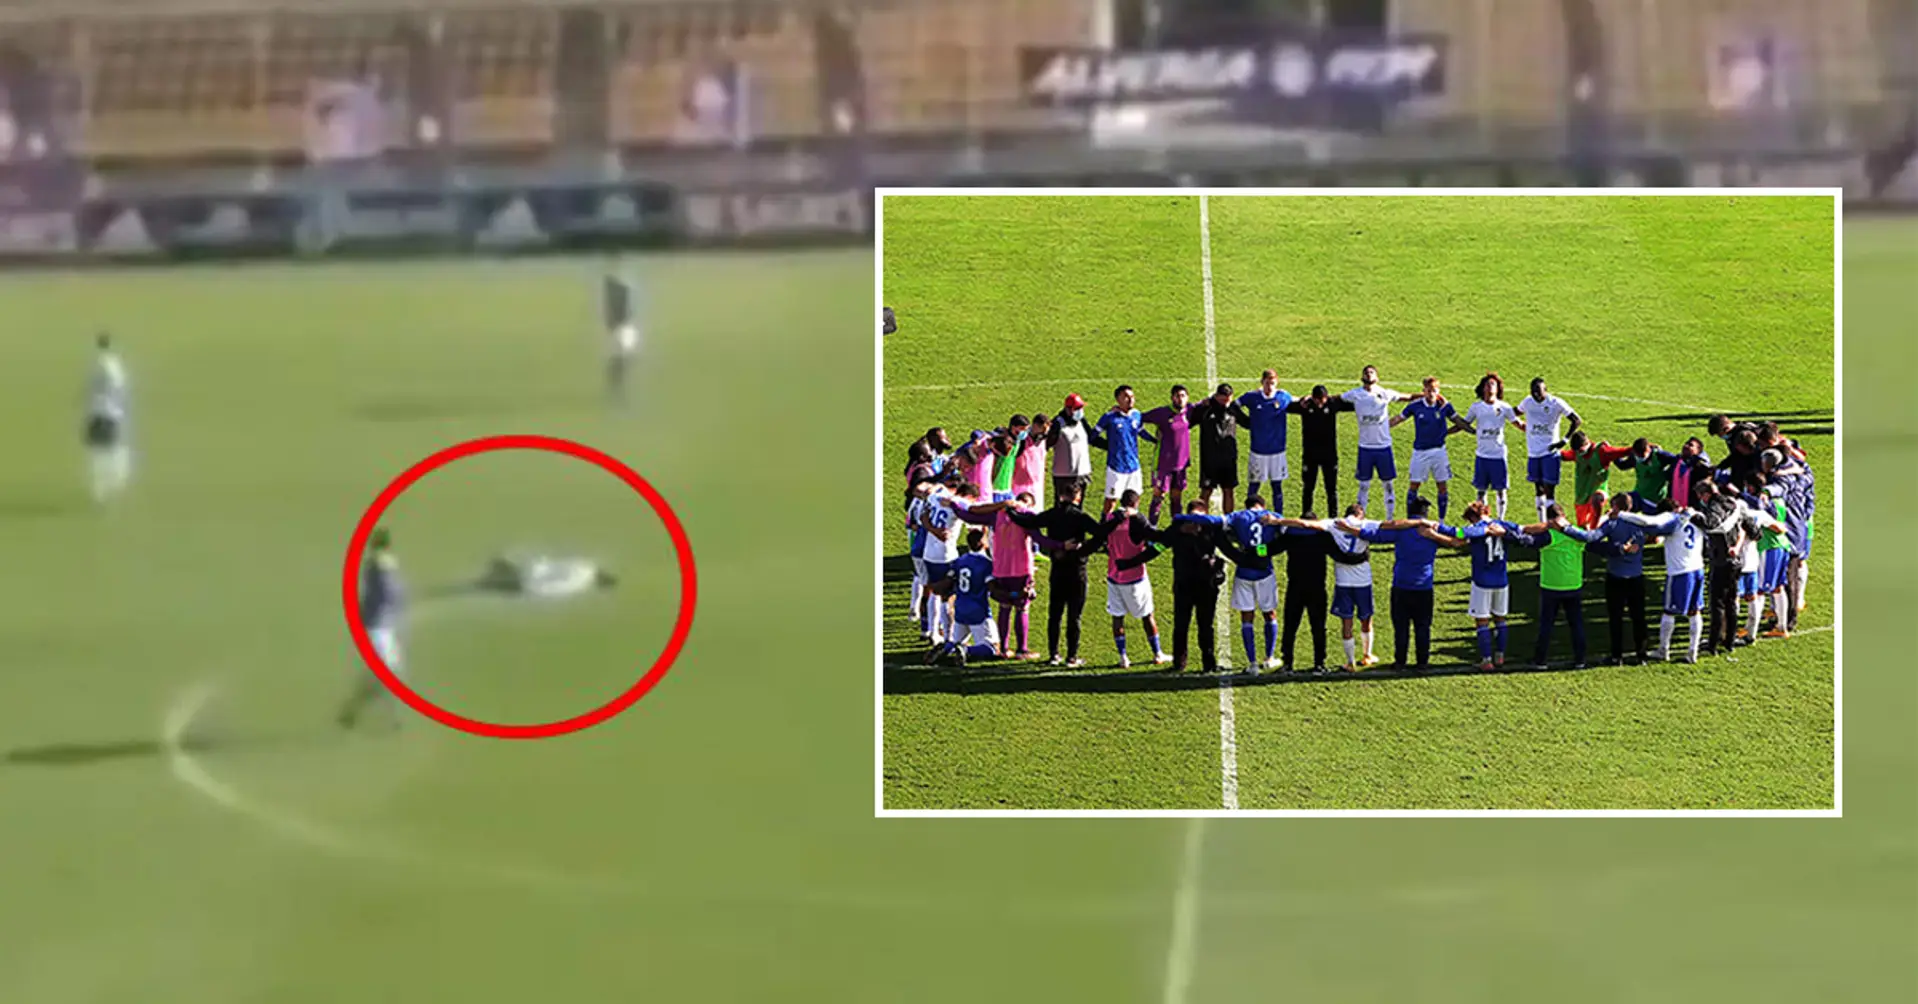 Heart attack on pitch: firefighter runs first to rescue footballer, both teams pray together - Football | Tribuna.com